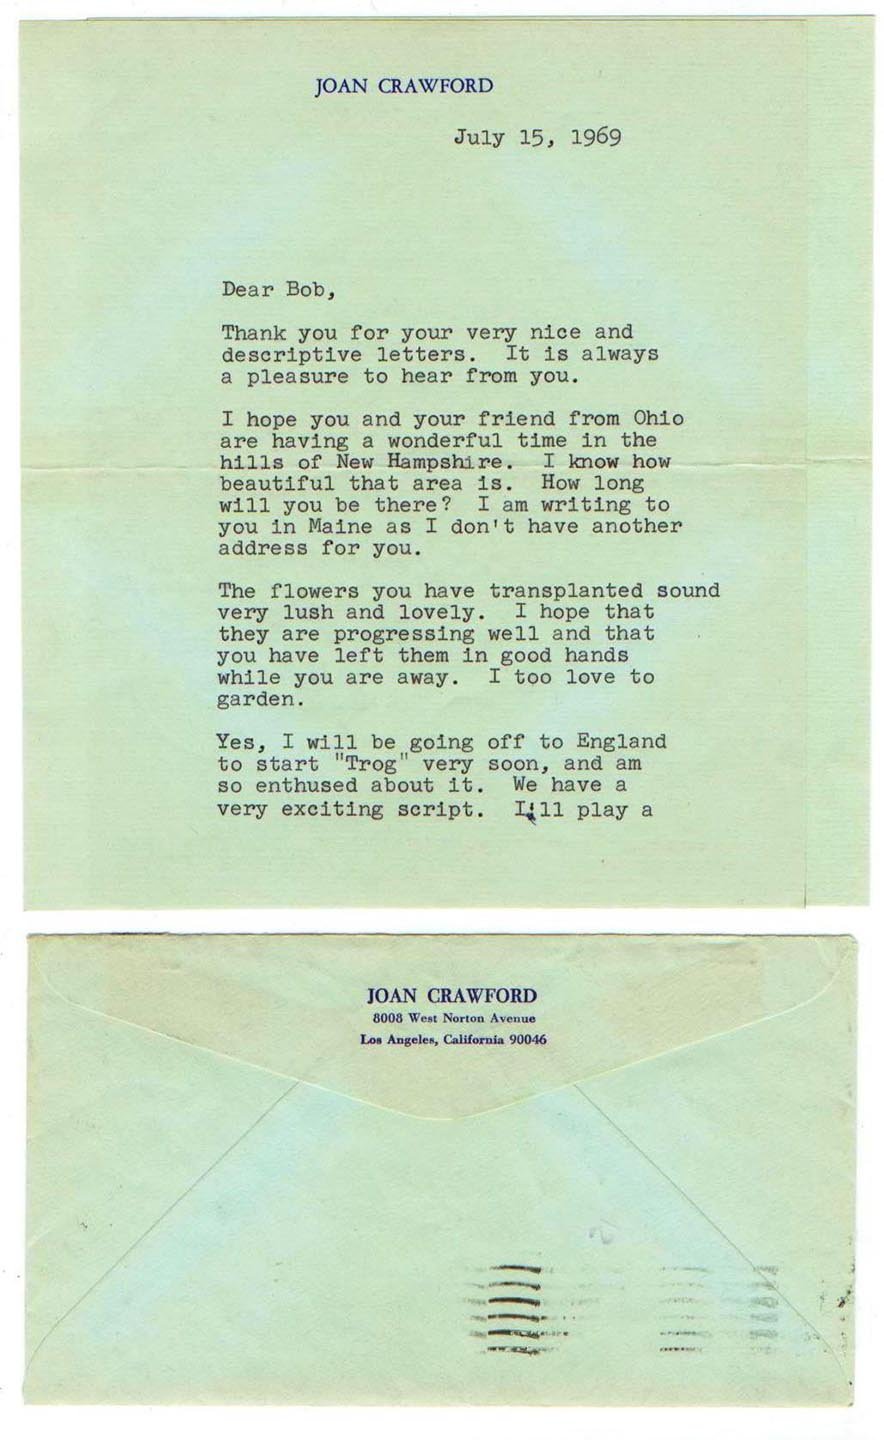 Letter to Robert Jean. July 15, 1969